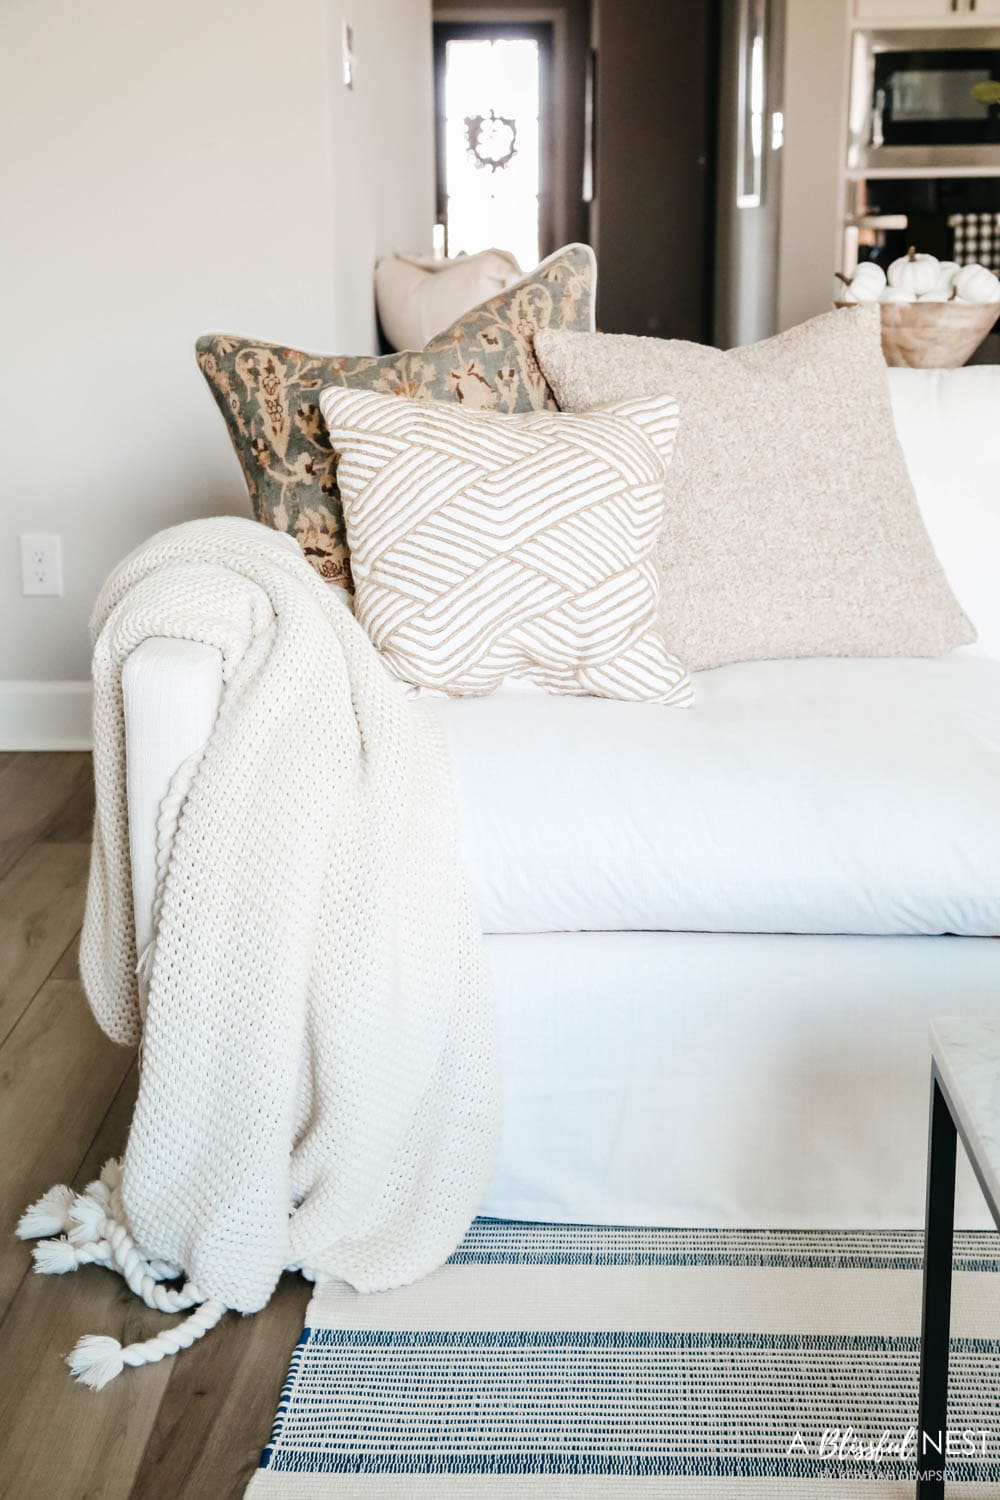 Fall hued pillows on cream colored sofa with a chunky knit blanket